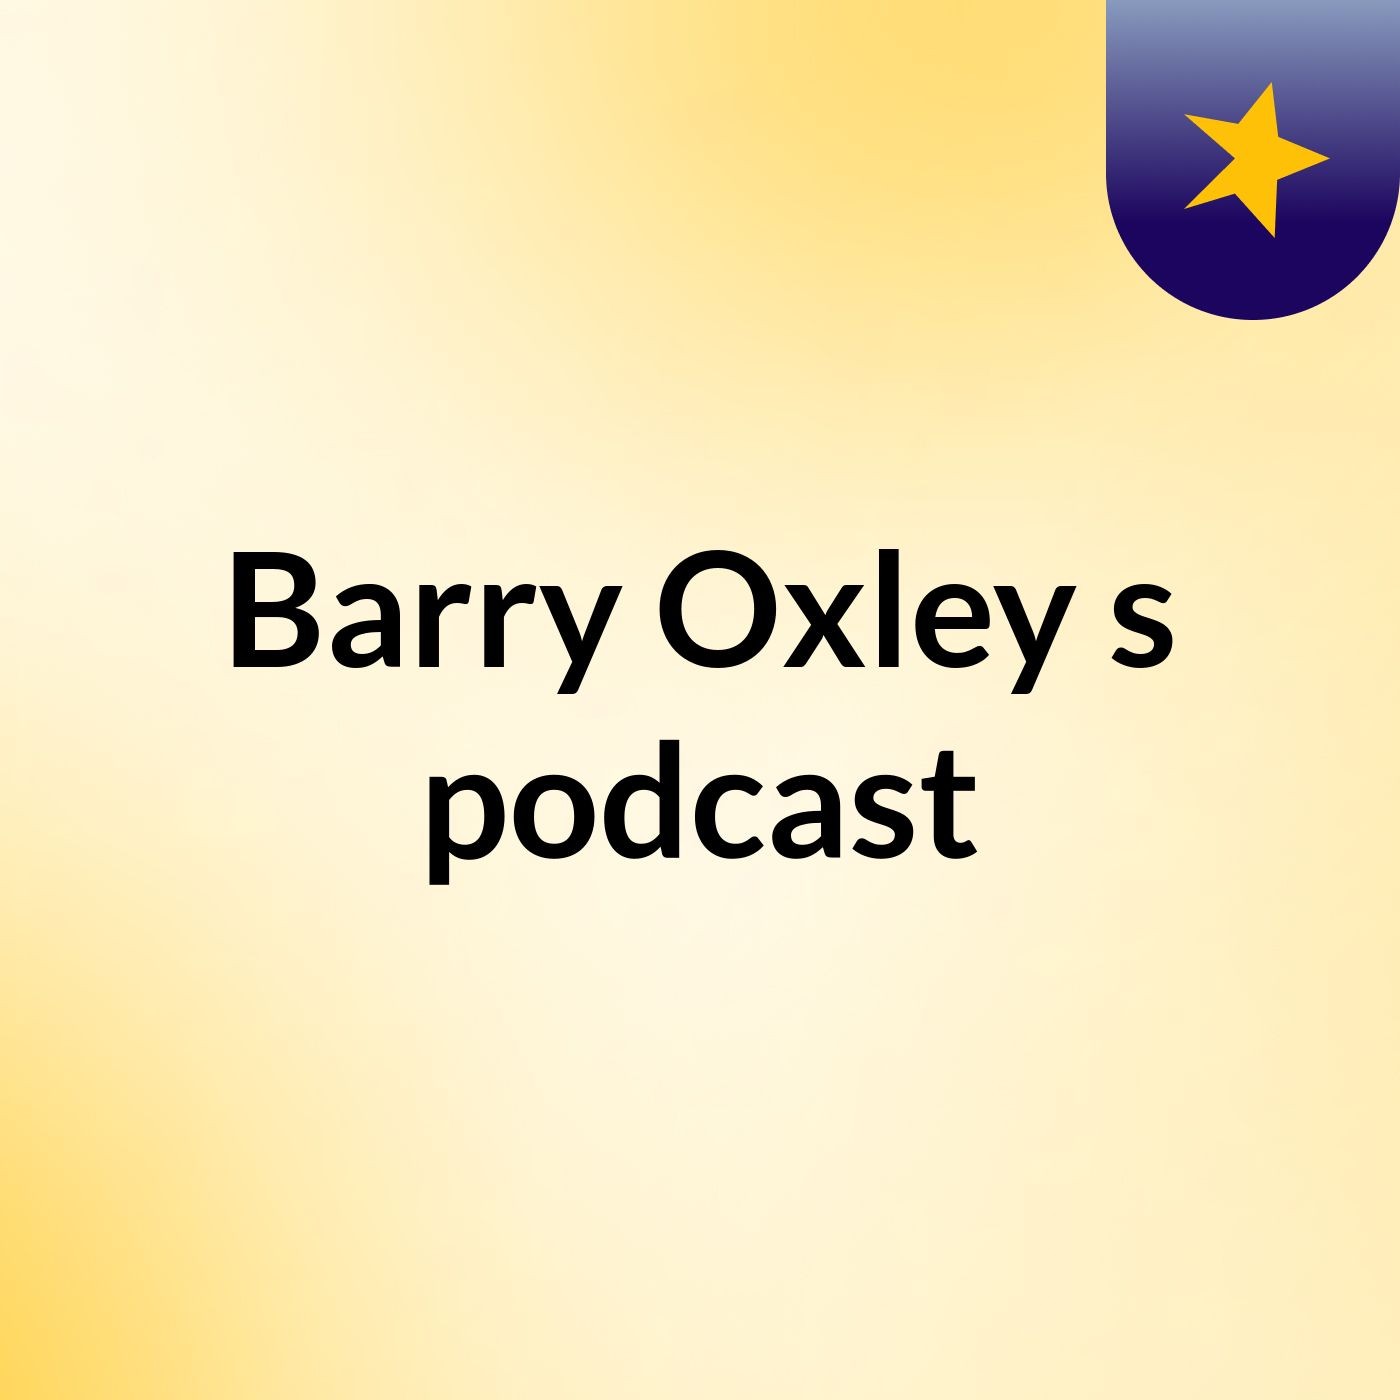 Episode 5 - Barry Oxley's podcast